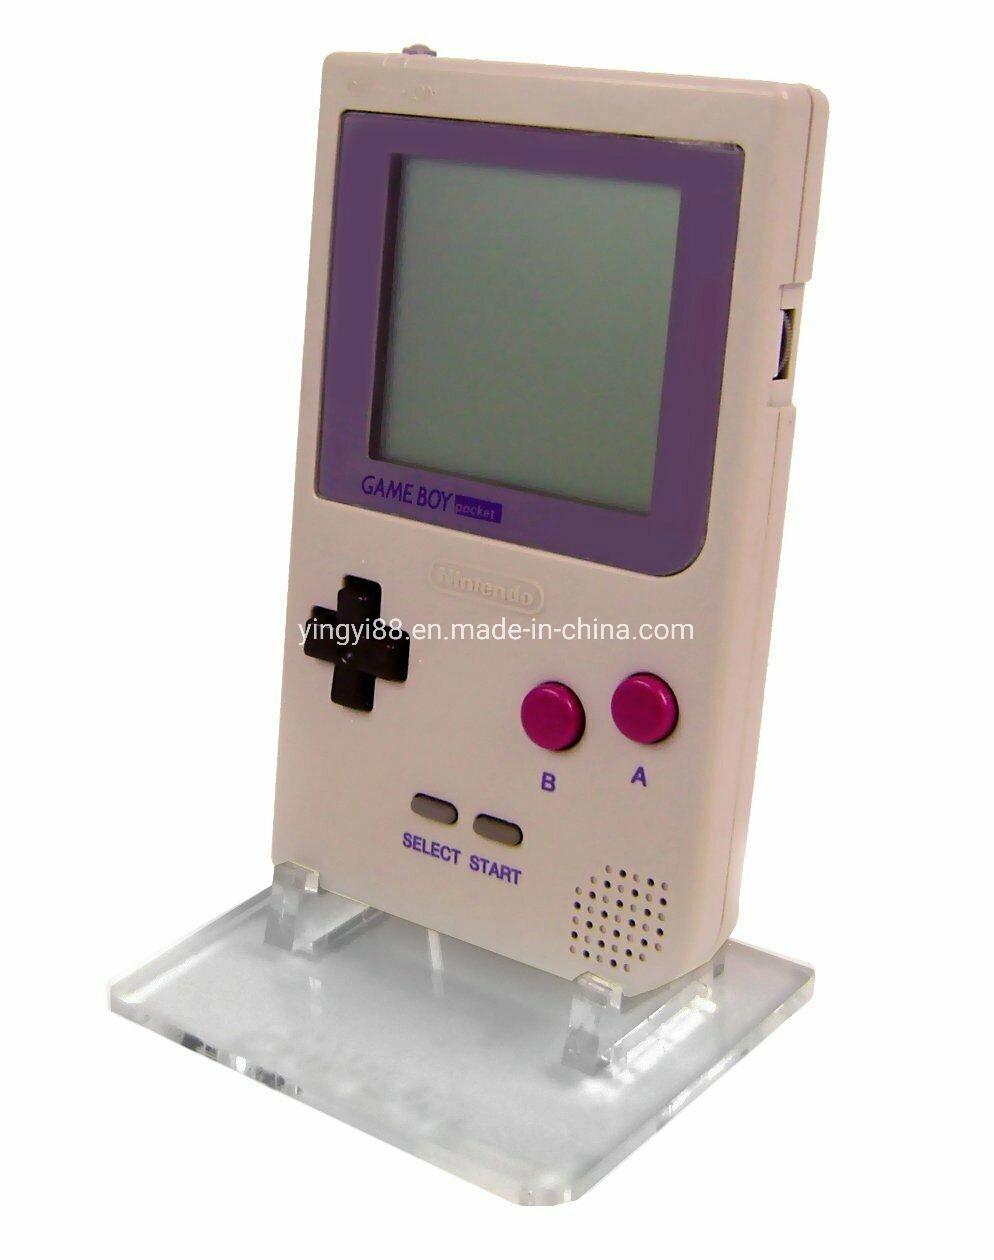 Customized Clear Acrylic Display Stand for Game Boy Console